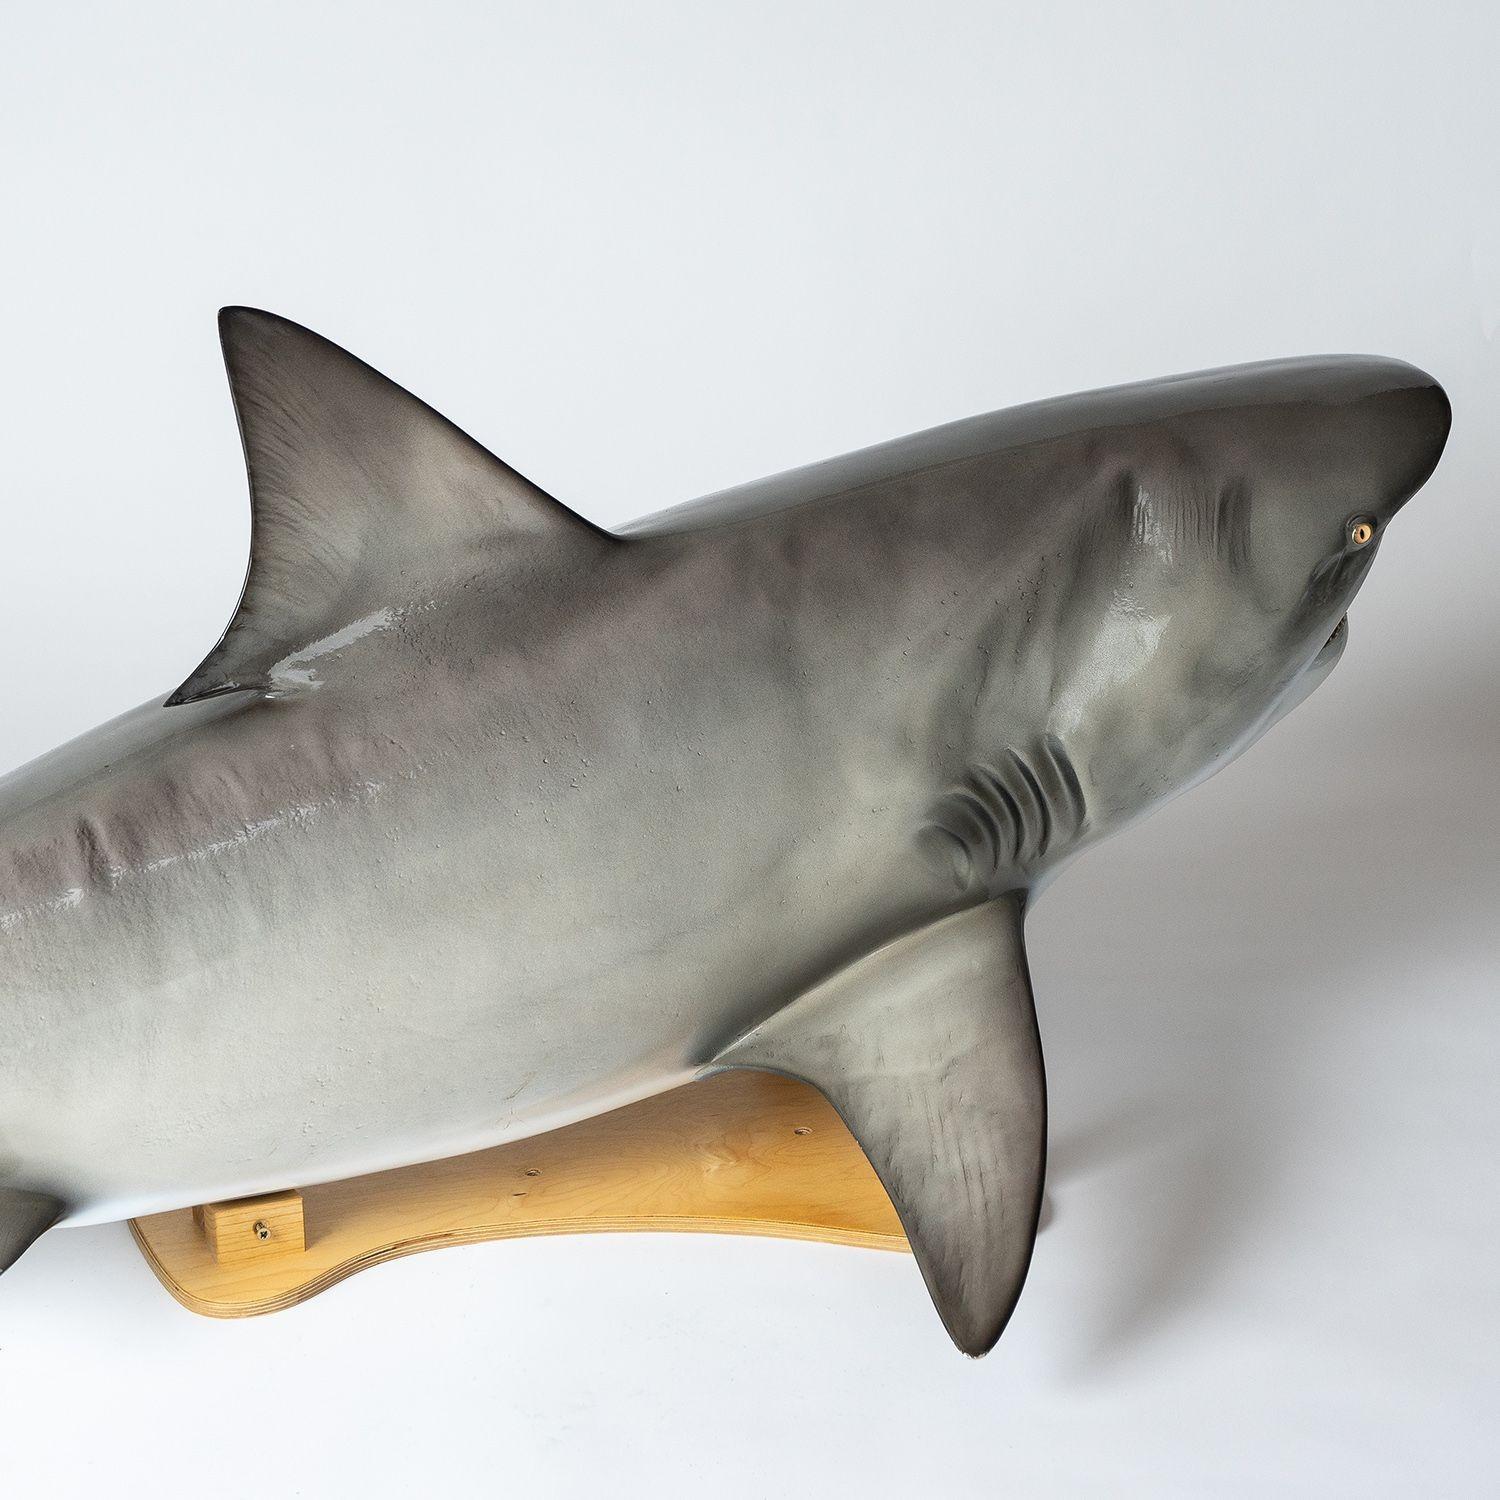 Vintage Museum-Quality Life-Size Model of a Bull Shark 8